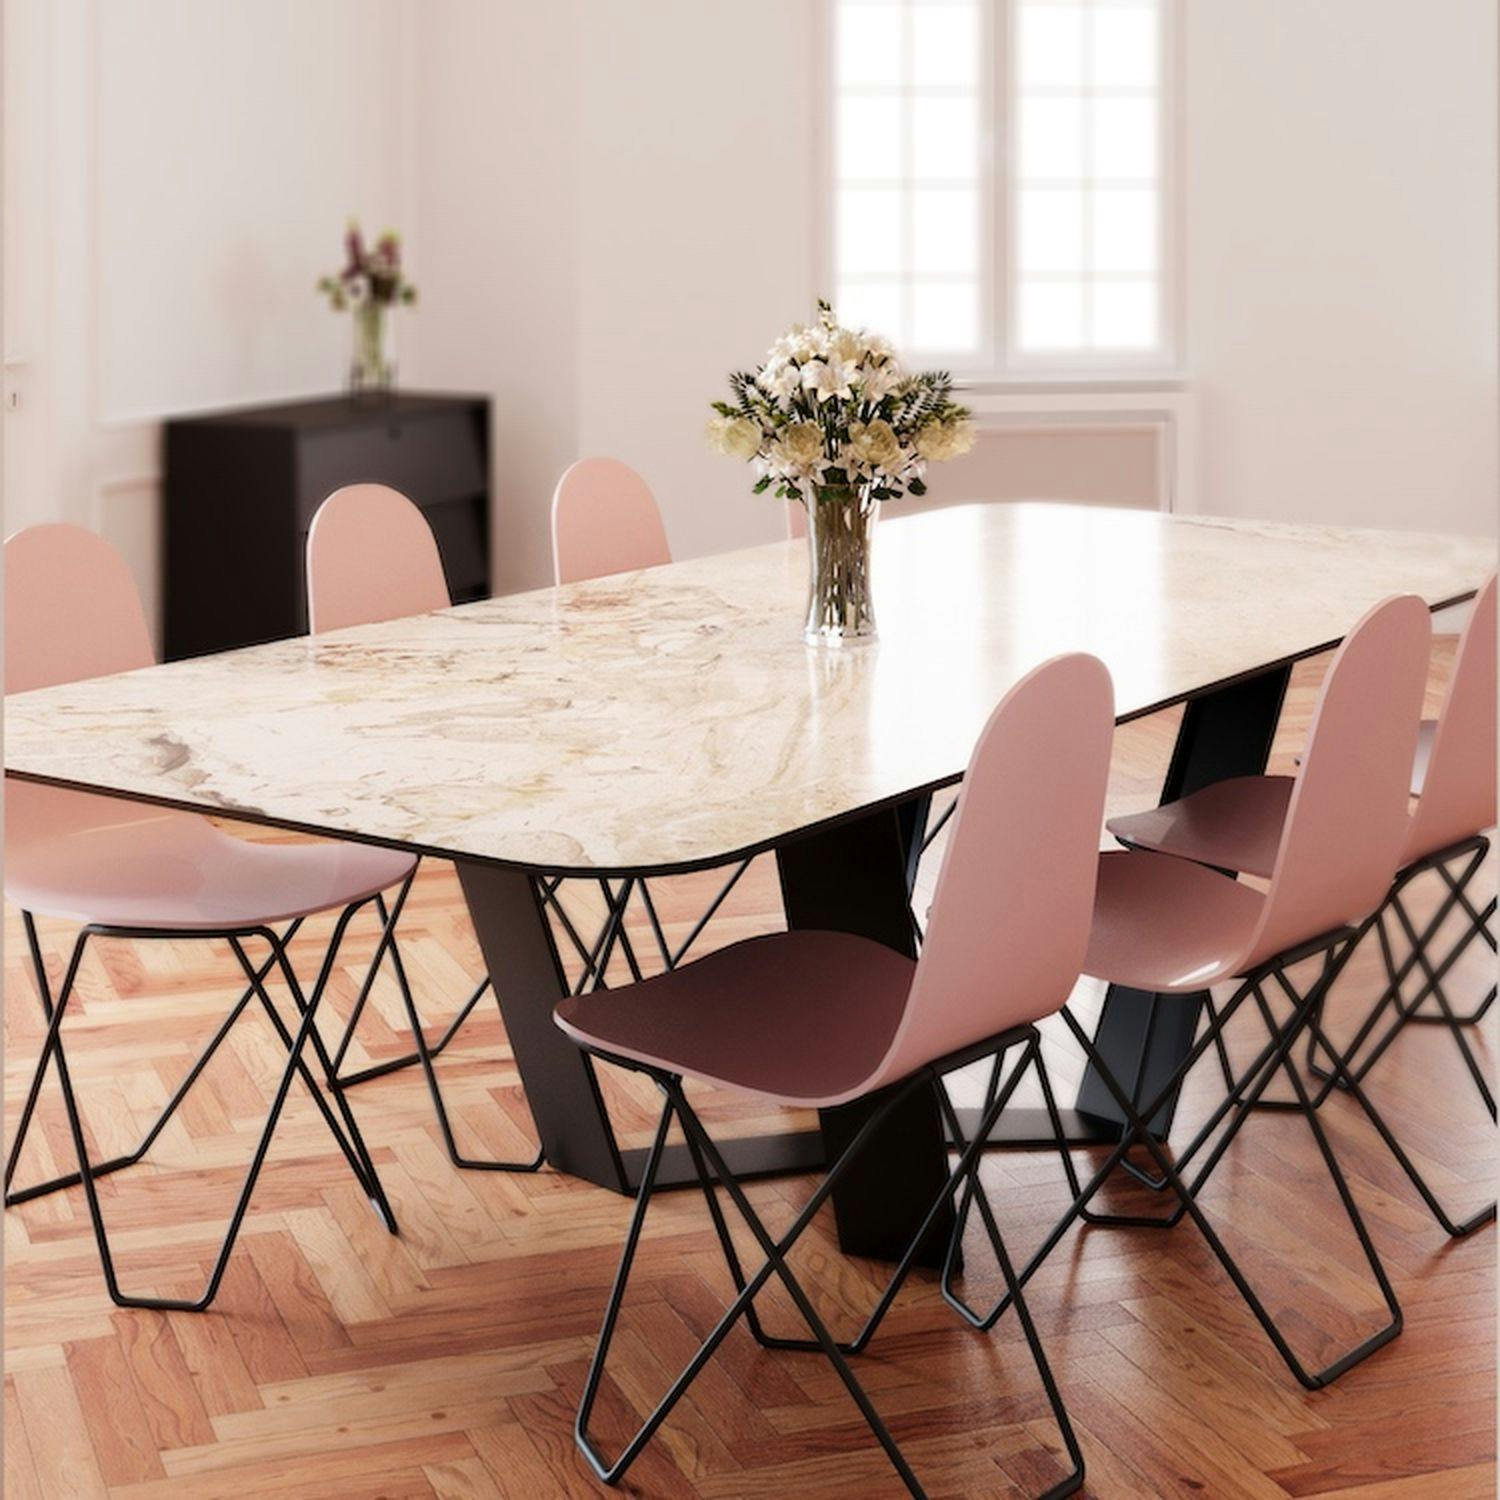 Pink dining chairs with sheepskin lamps above